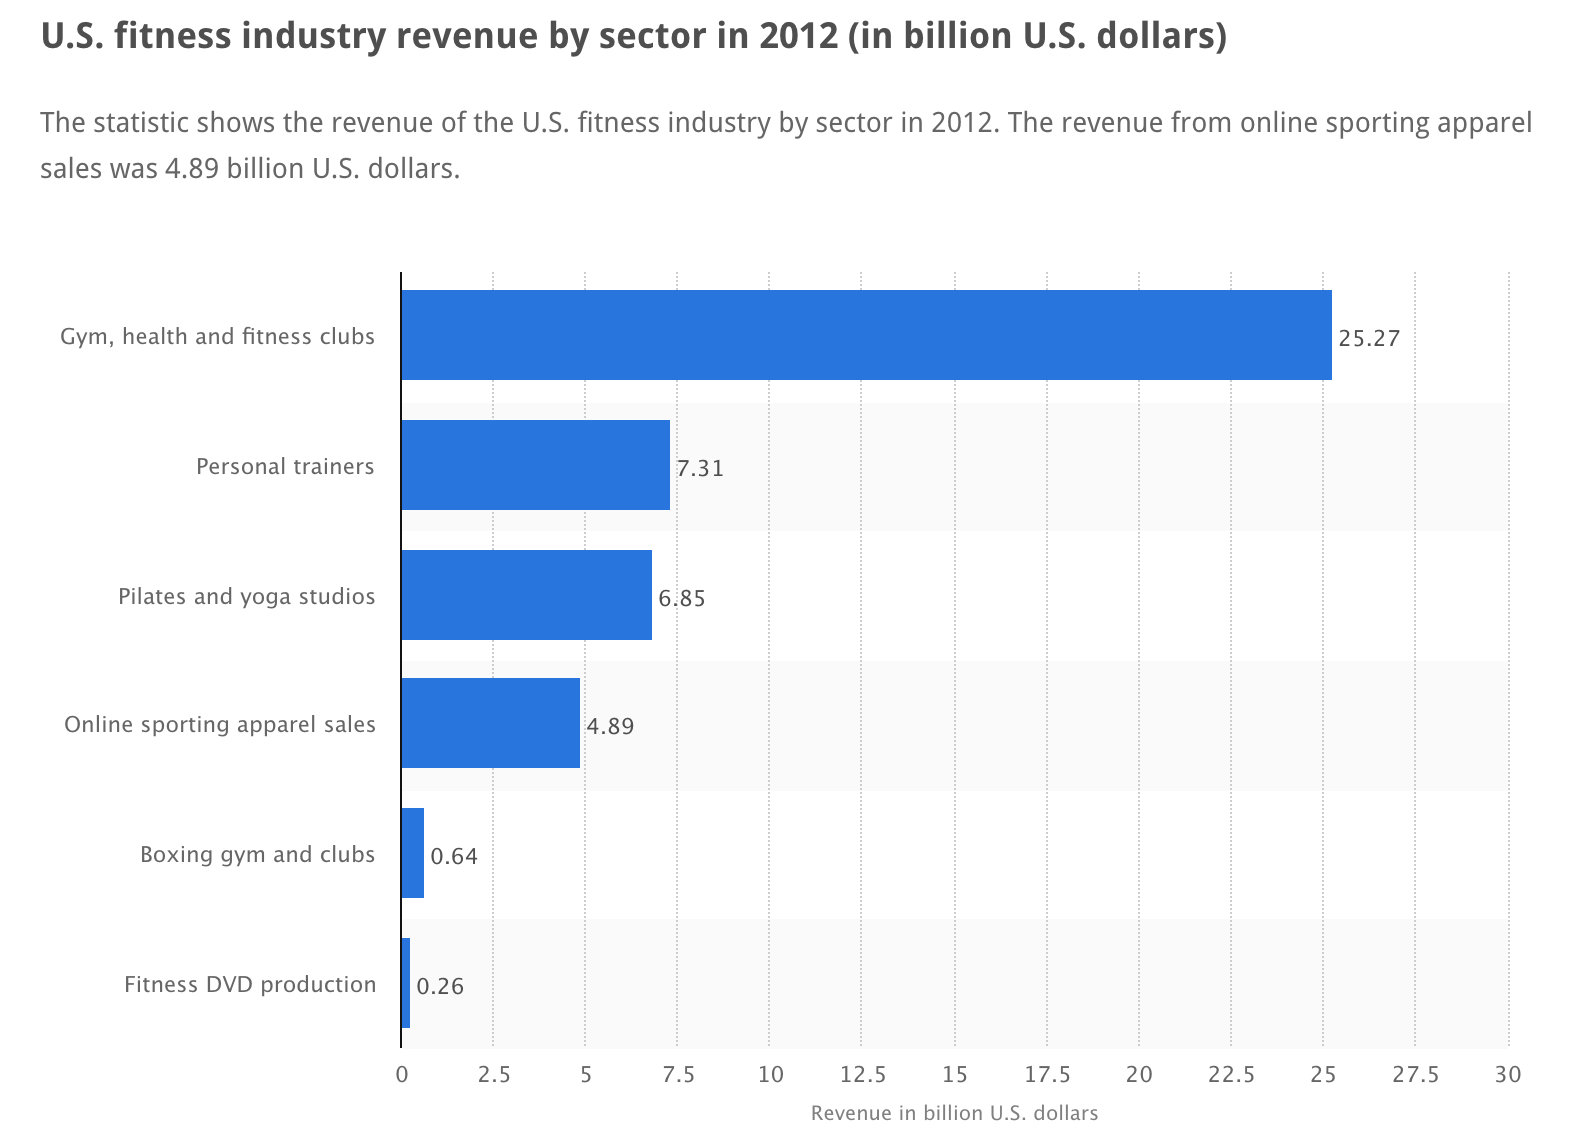 Source: http://www.statista.com/statistics/242190/us-fitness-industry-revenue-by-sector/